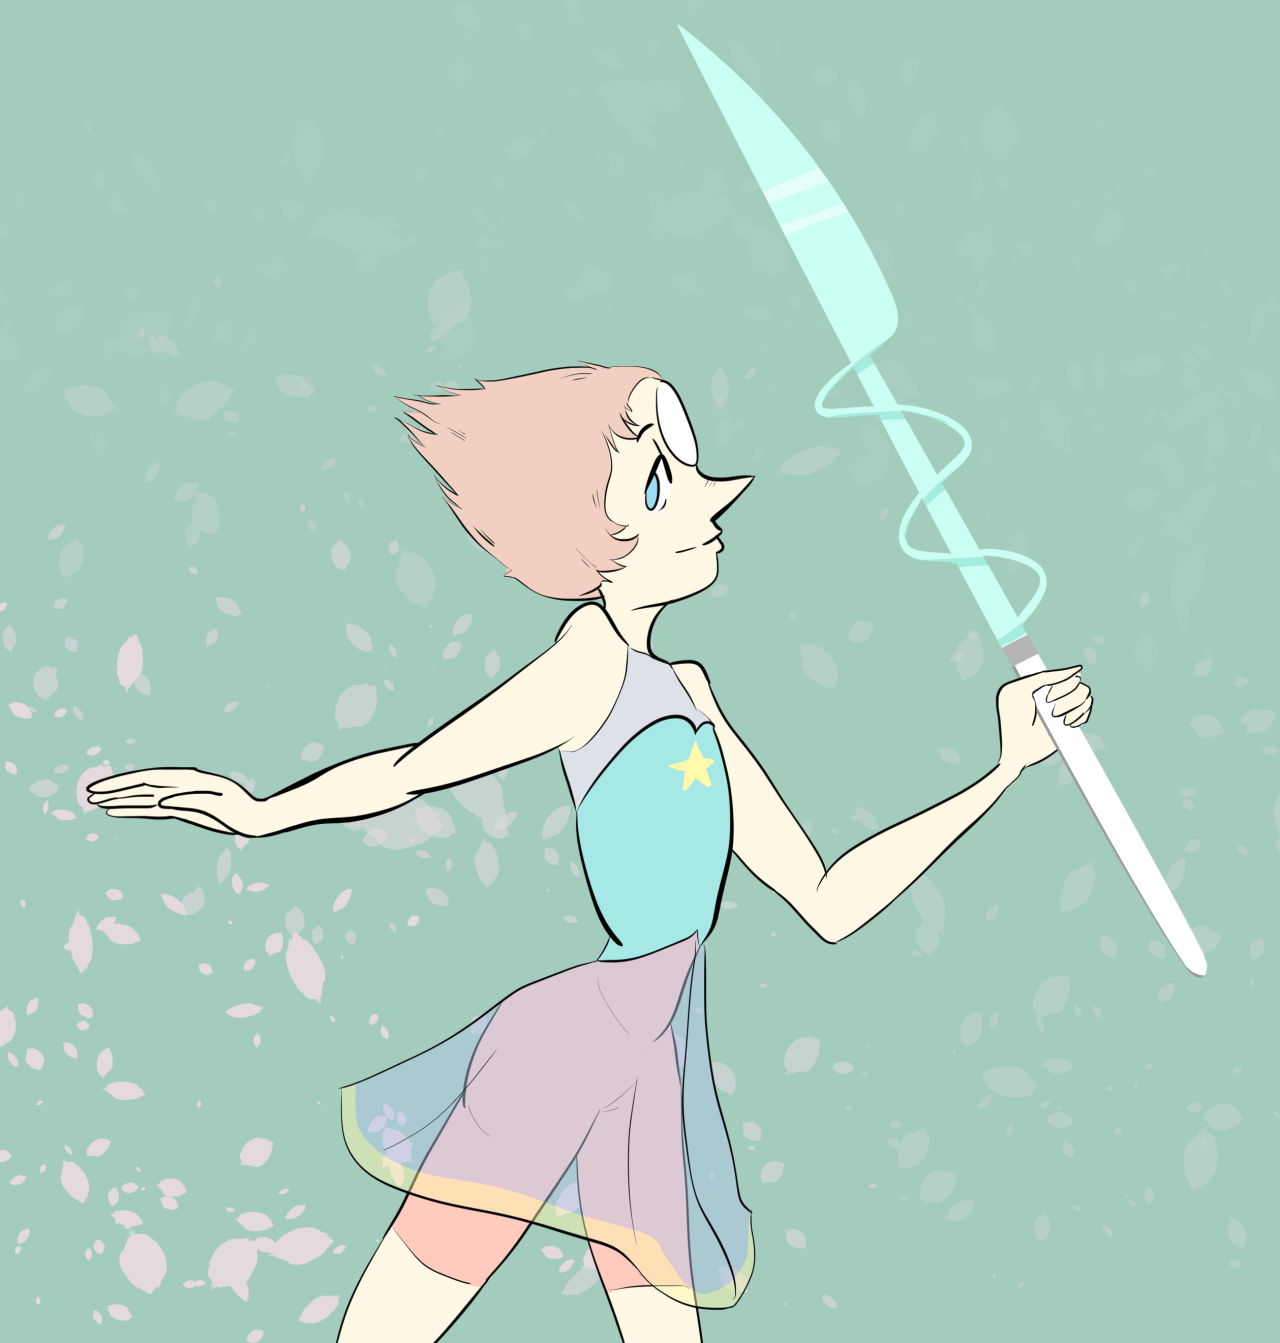 (I know I said I’d draw Amethyst next but she’s coming!) Trying out some new techniques and whipped out this Pearl.